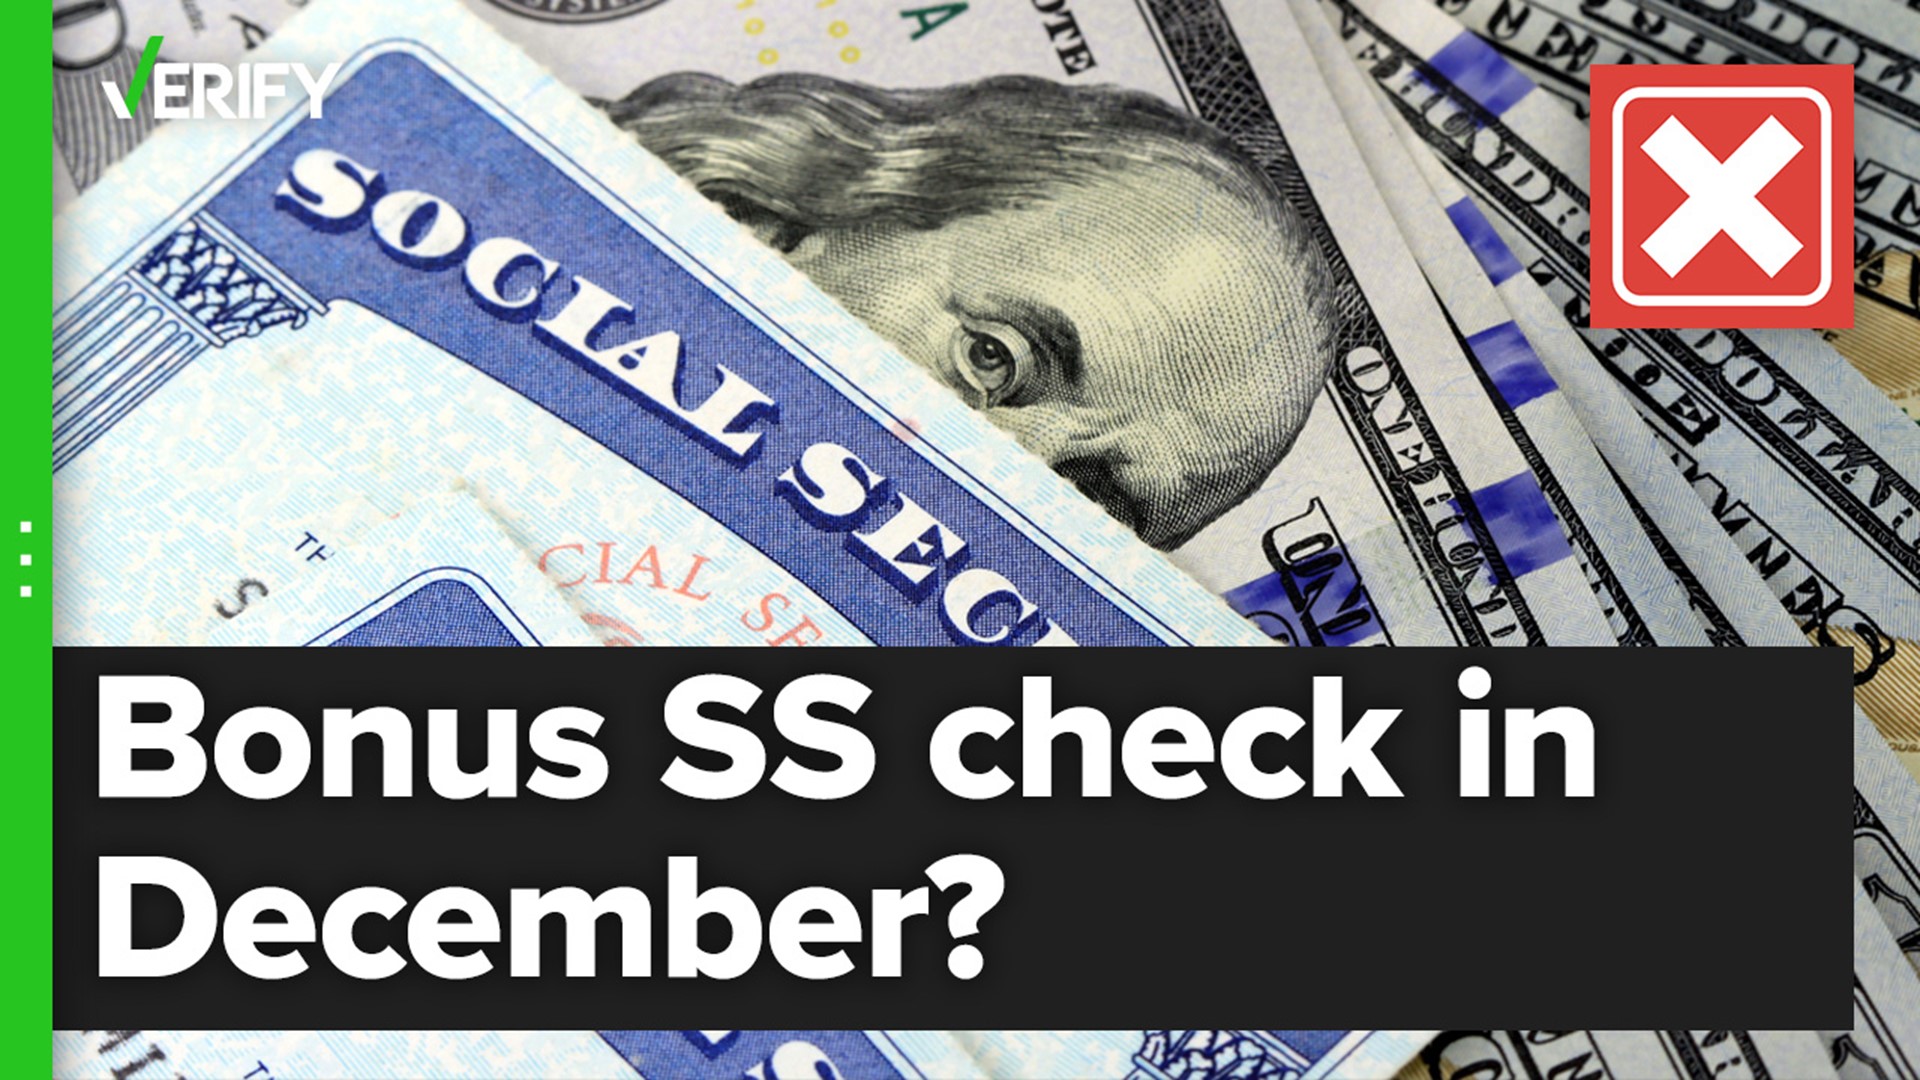 Millions of Supplemental Security Income (SSI) recipients will get two payments in December. But the second is an advance for January, not a bonus payment.